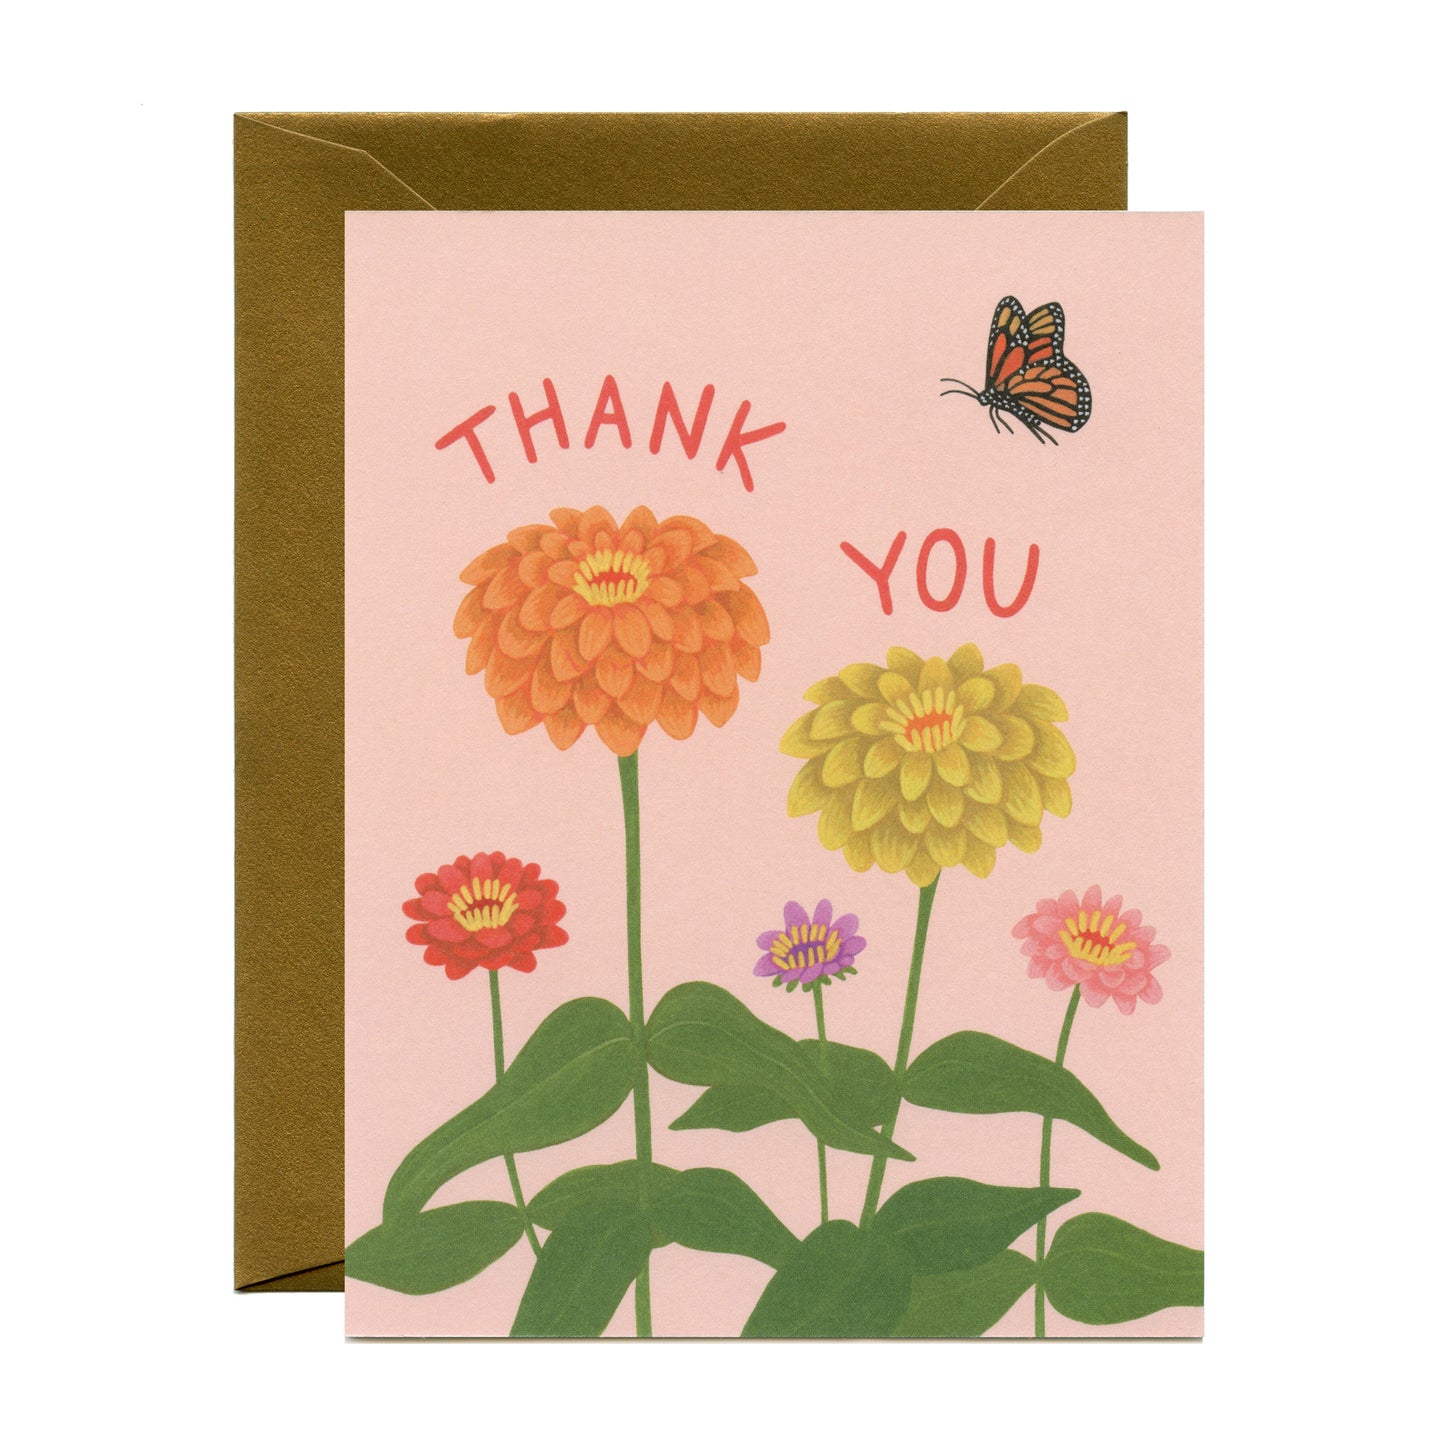 ZINNIA FLOWER AND MONARCH BUTTERFLY - THANK YOU GREETING CARD